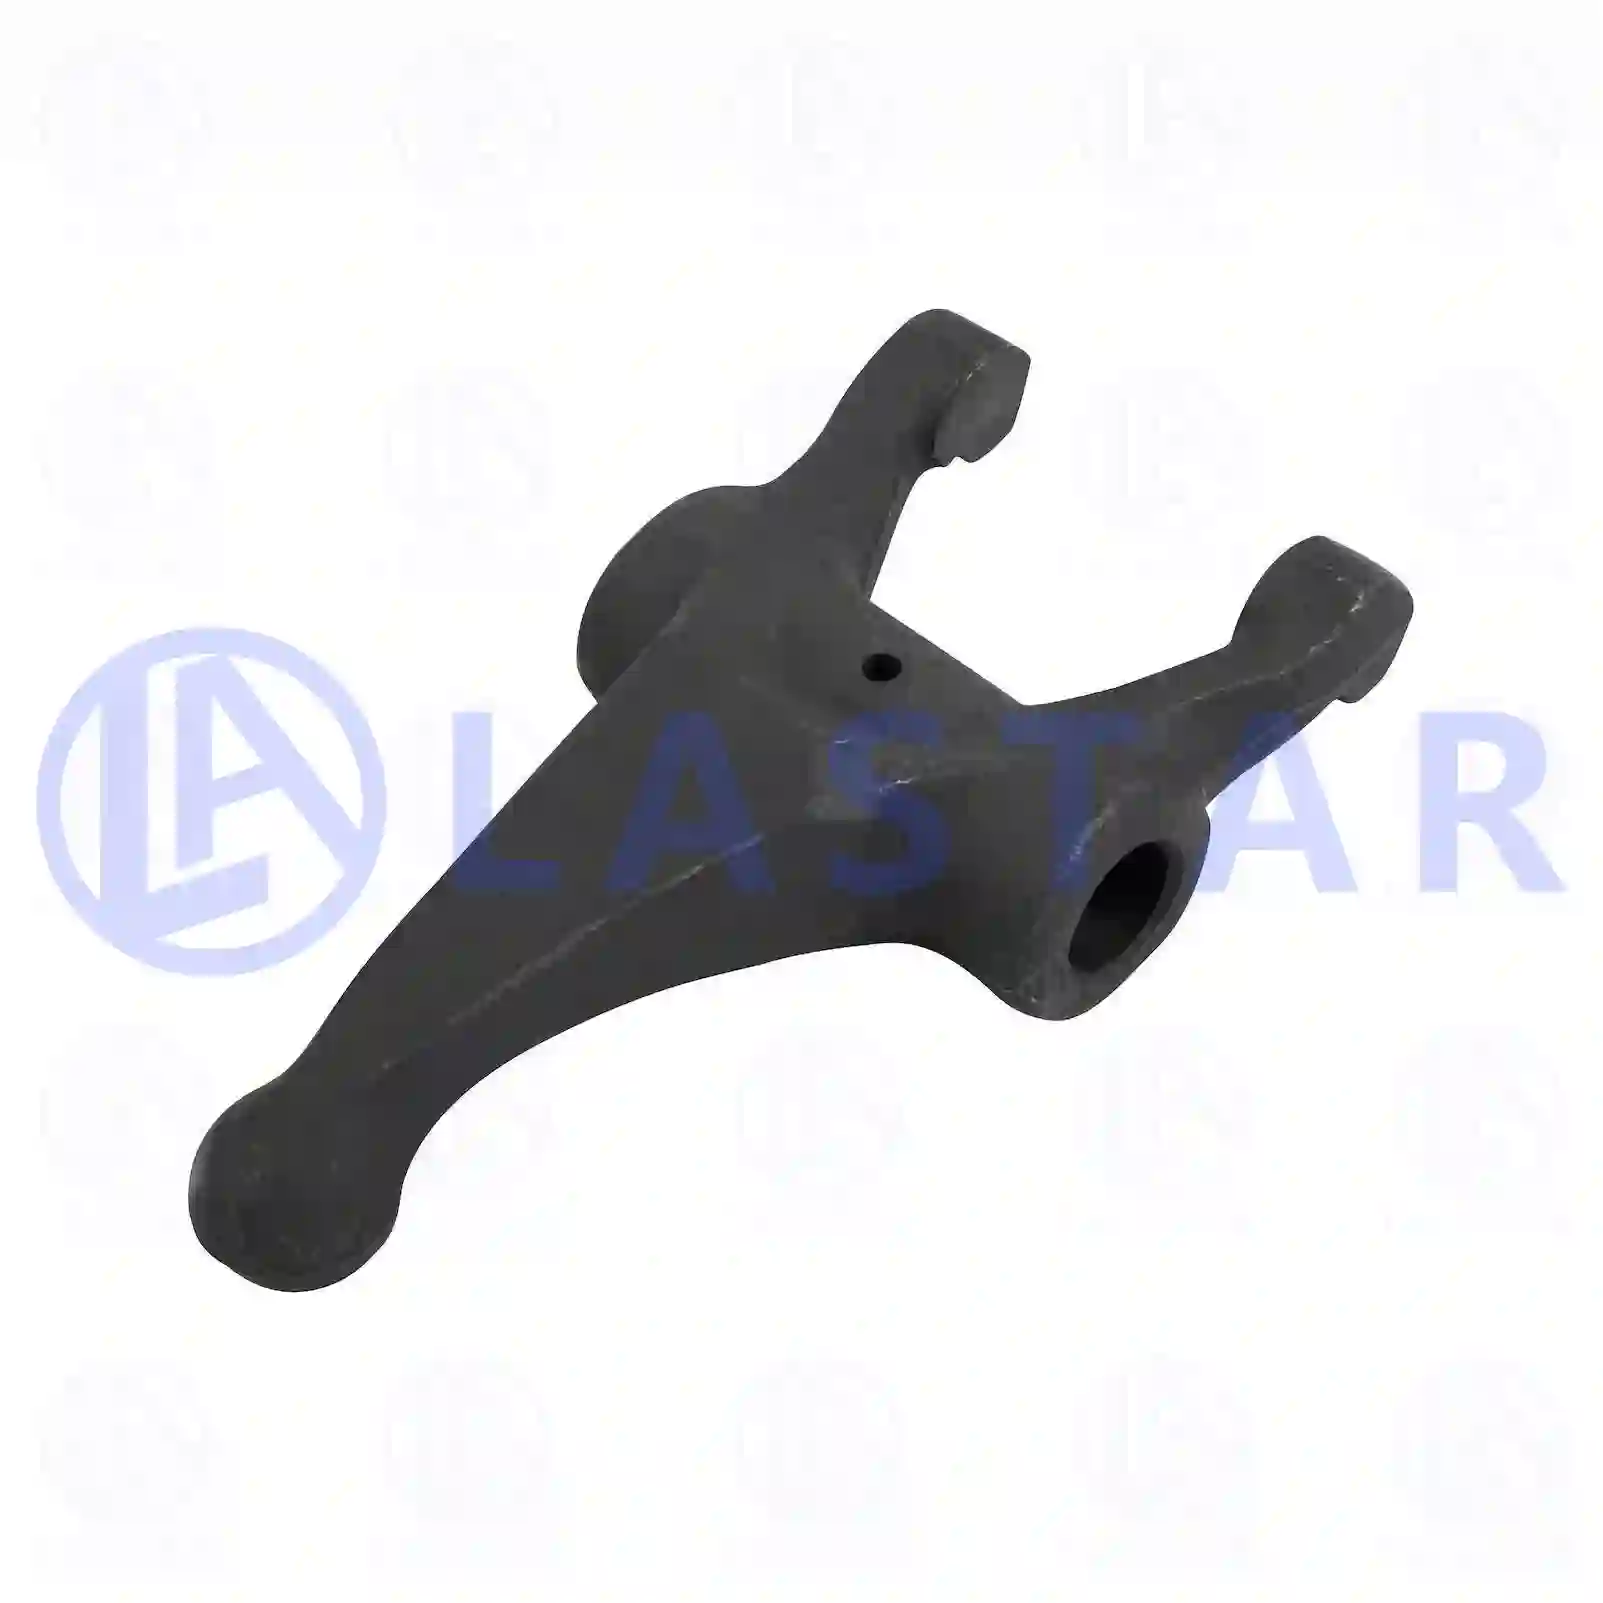 Release fork, 77723012, 42115520 ||  77723012 Lastar Spare Part | Truck Spare Parts, Auotomotive Spare Parts Release fork, 77723012, 42115520 ||  77723012 Lastar Spare Part | Truck Spare Parts, Auotomotive Spare Parts